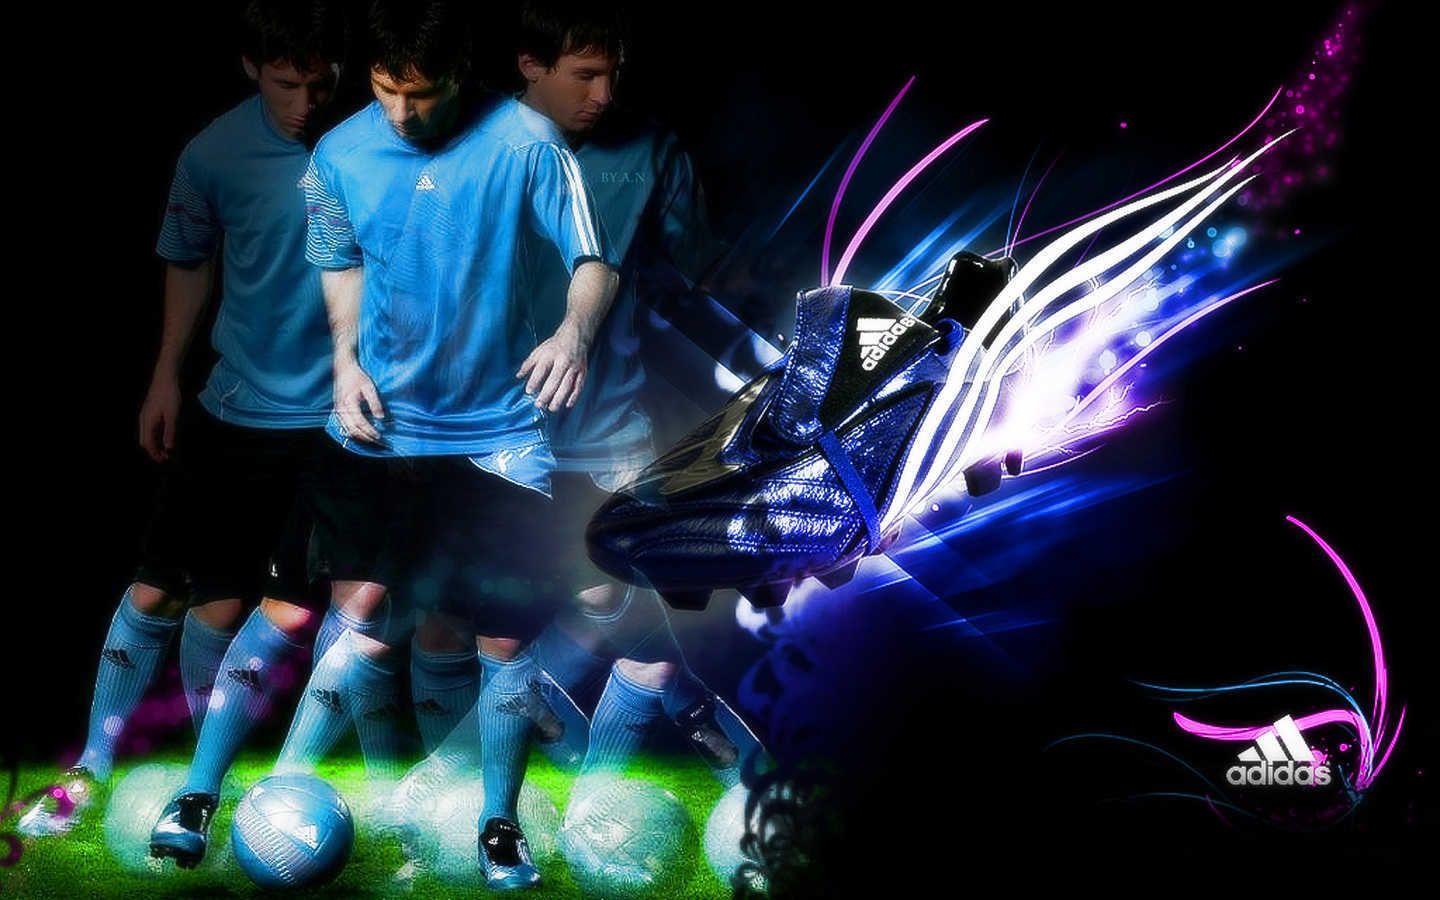 Lionel Messi Adidas Shoe Wallpaper 1440900 Lionel Messi Wallpapers 1440x900